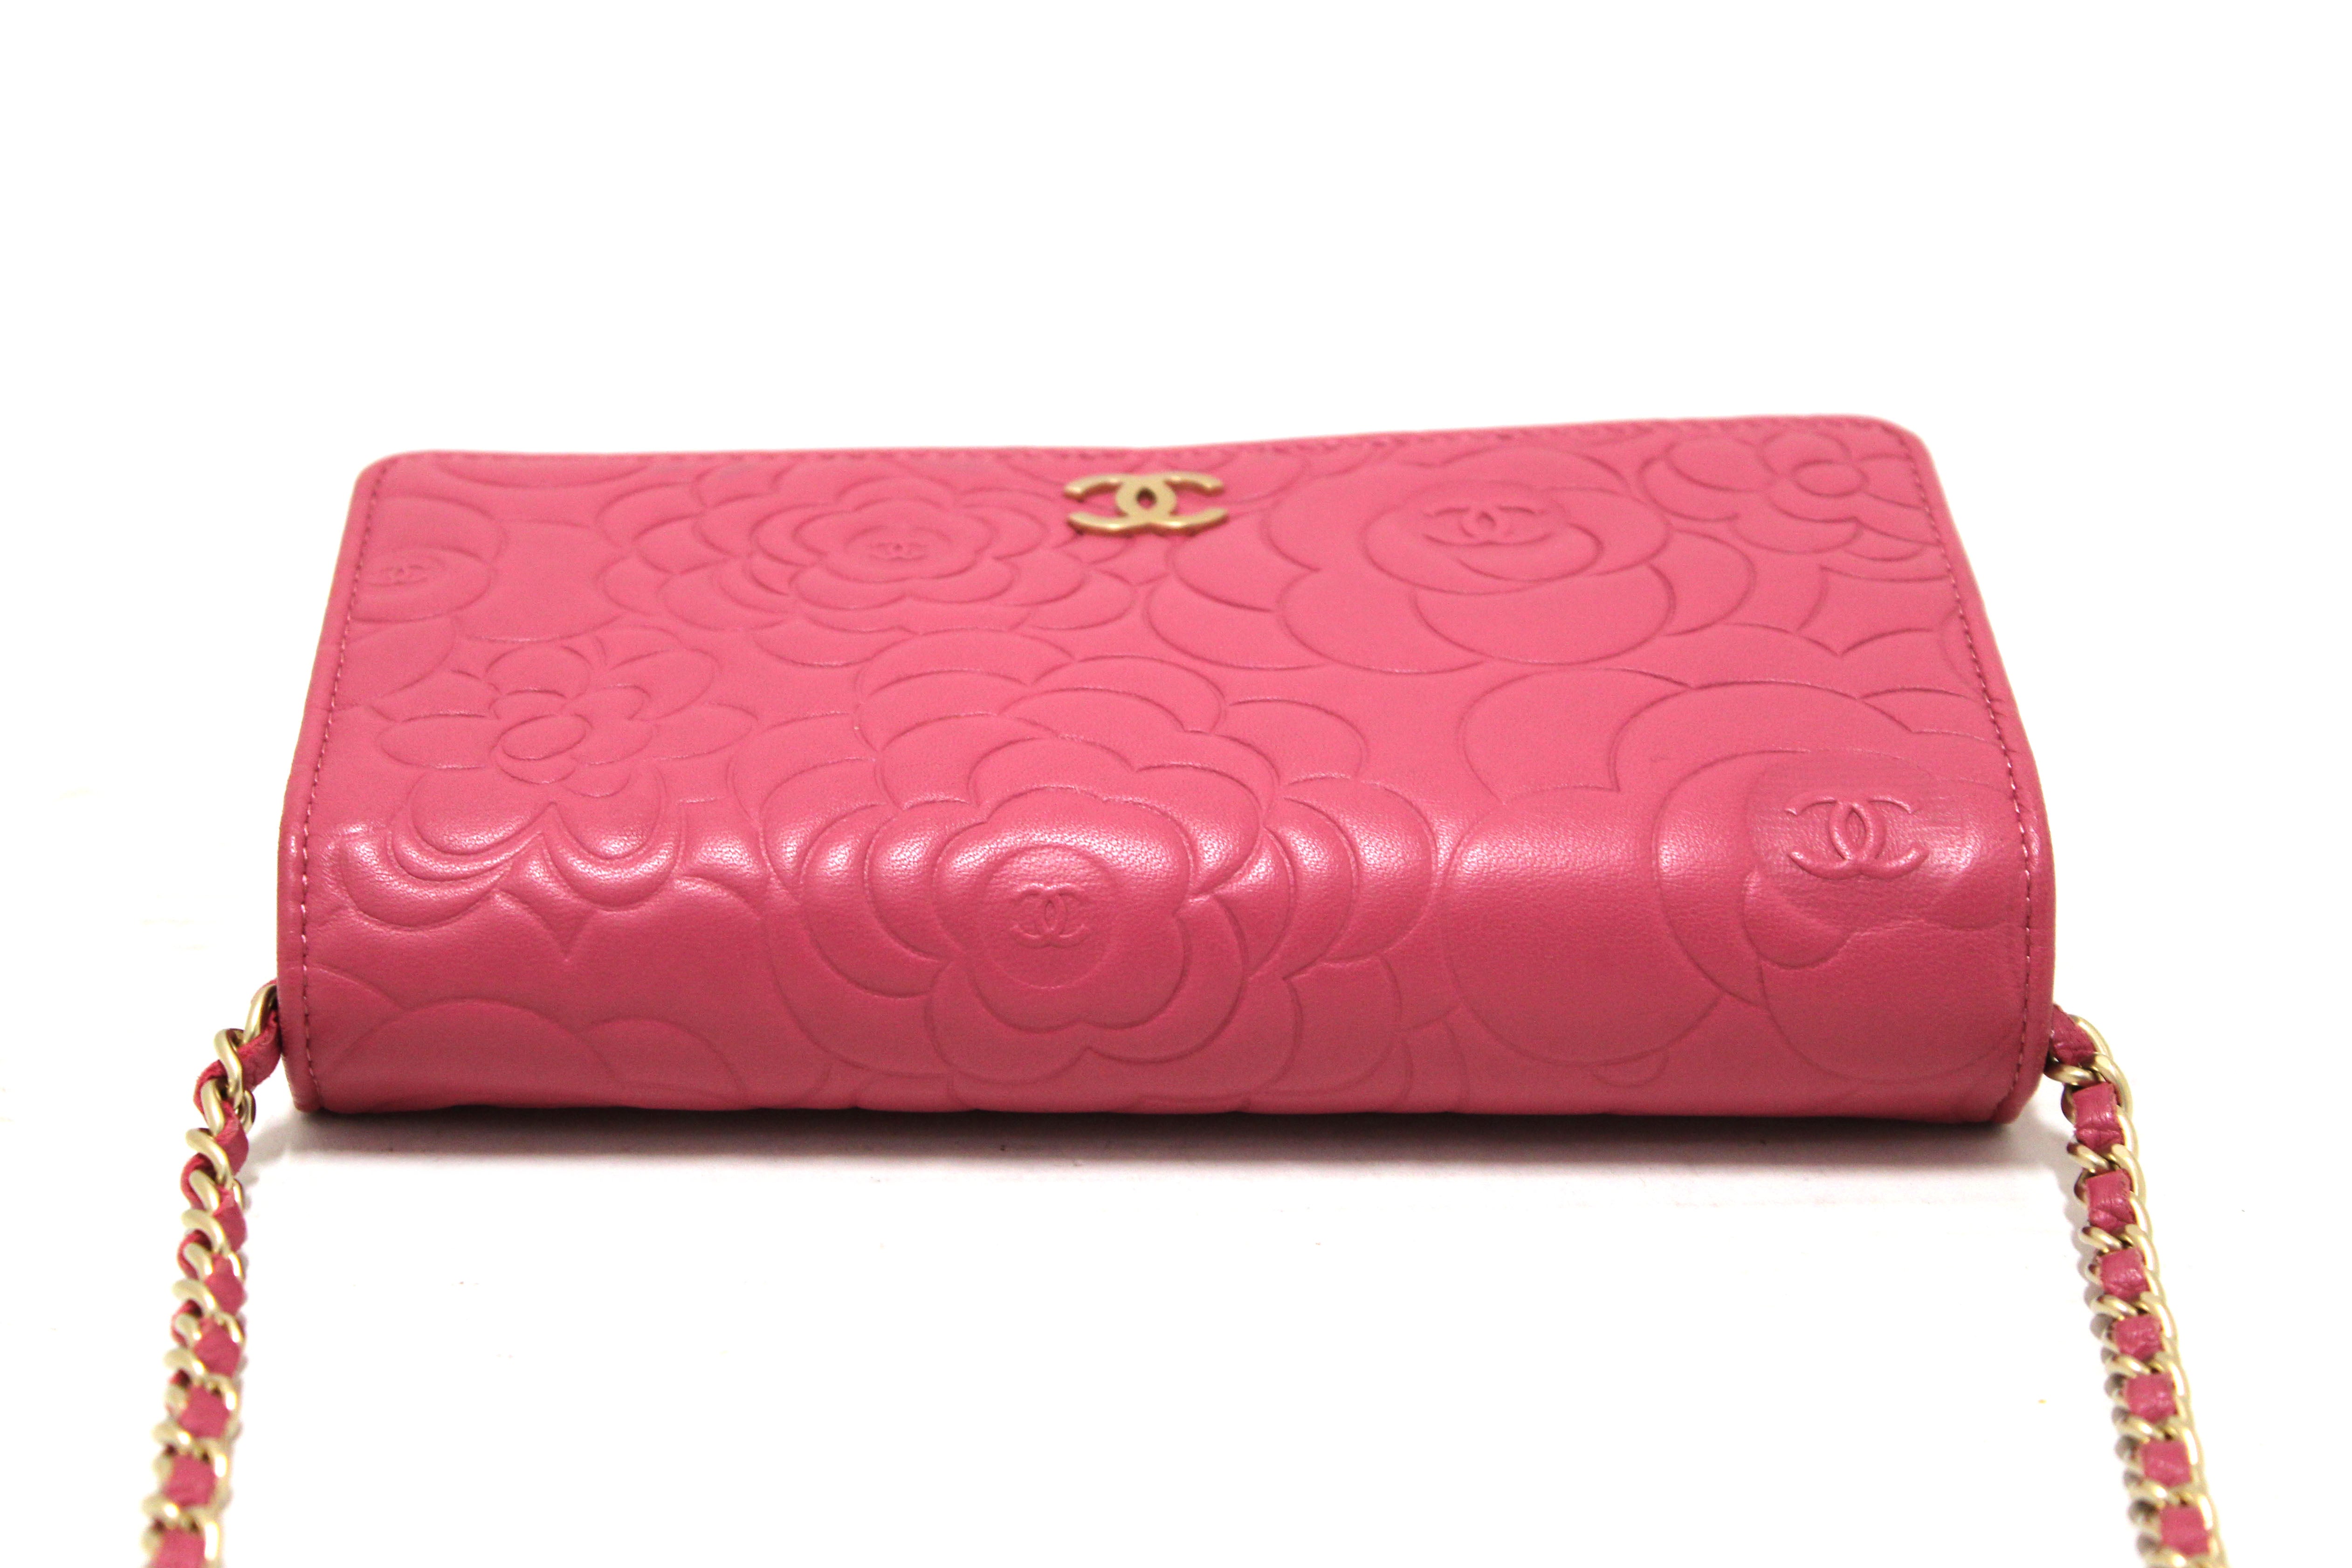 Chanel - Authenticated Wallet on Chain Clutch Bag - Leather Pink Plain for Women, Very Good Condition